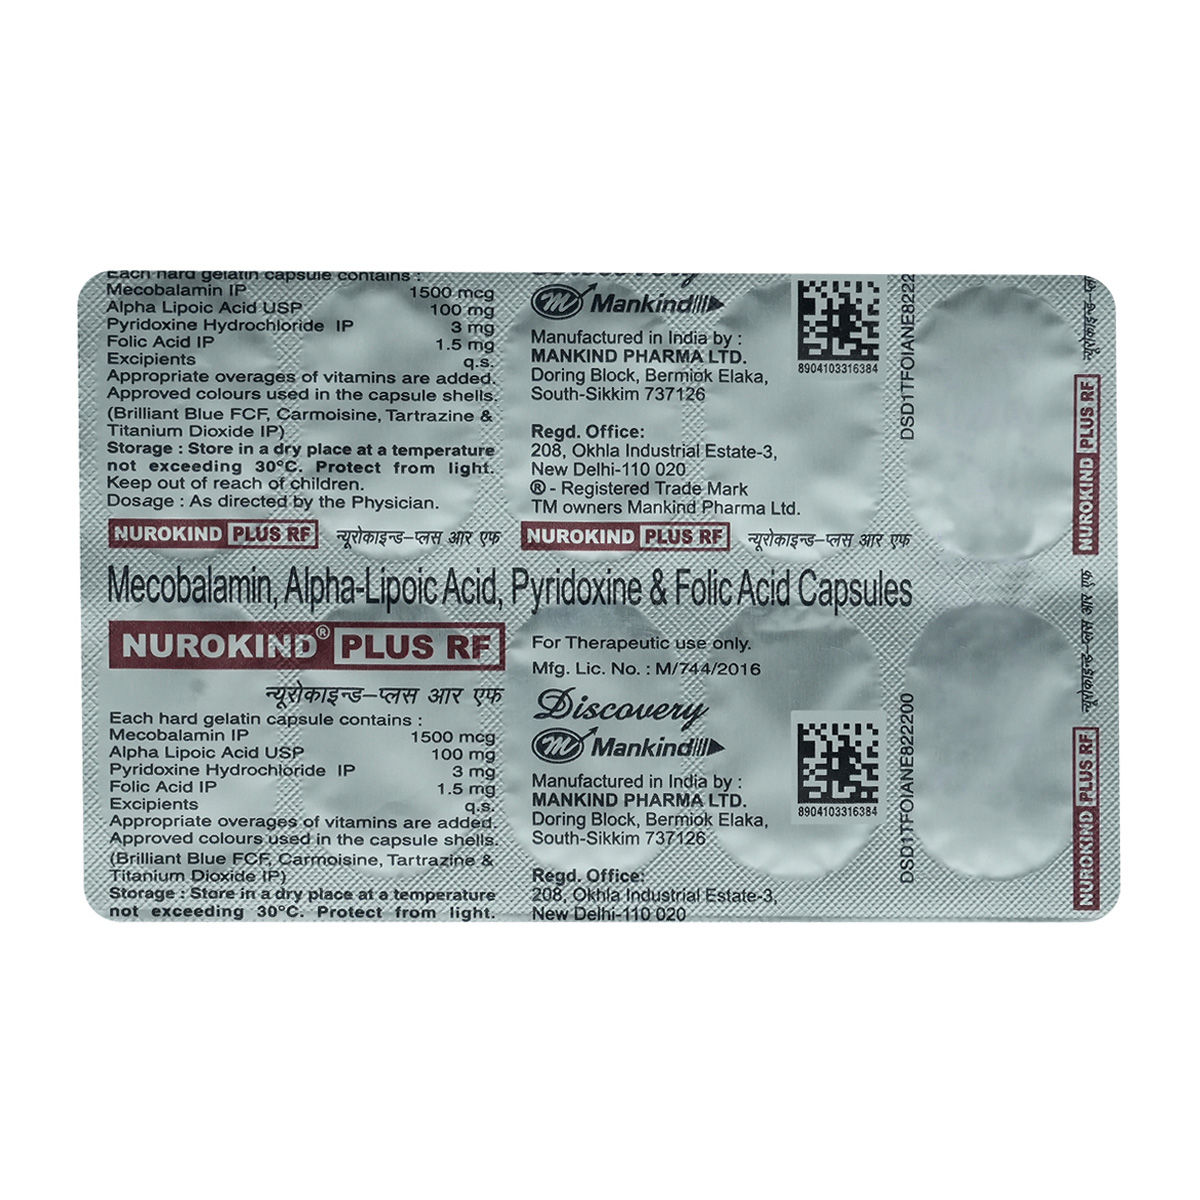 Nurokind Plus RF Capsule 10's Price, Uses, Side Effects, Composition -  Apollo Pharmacy